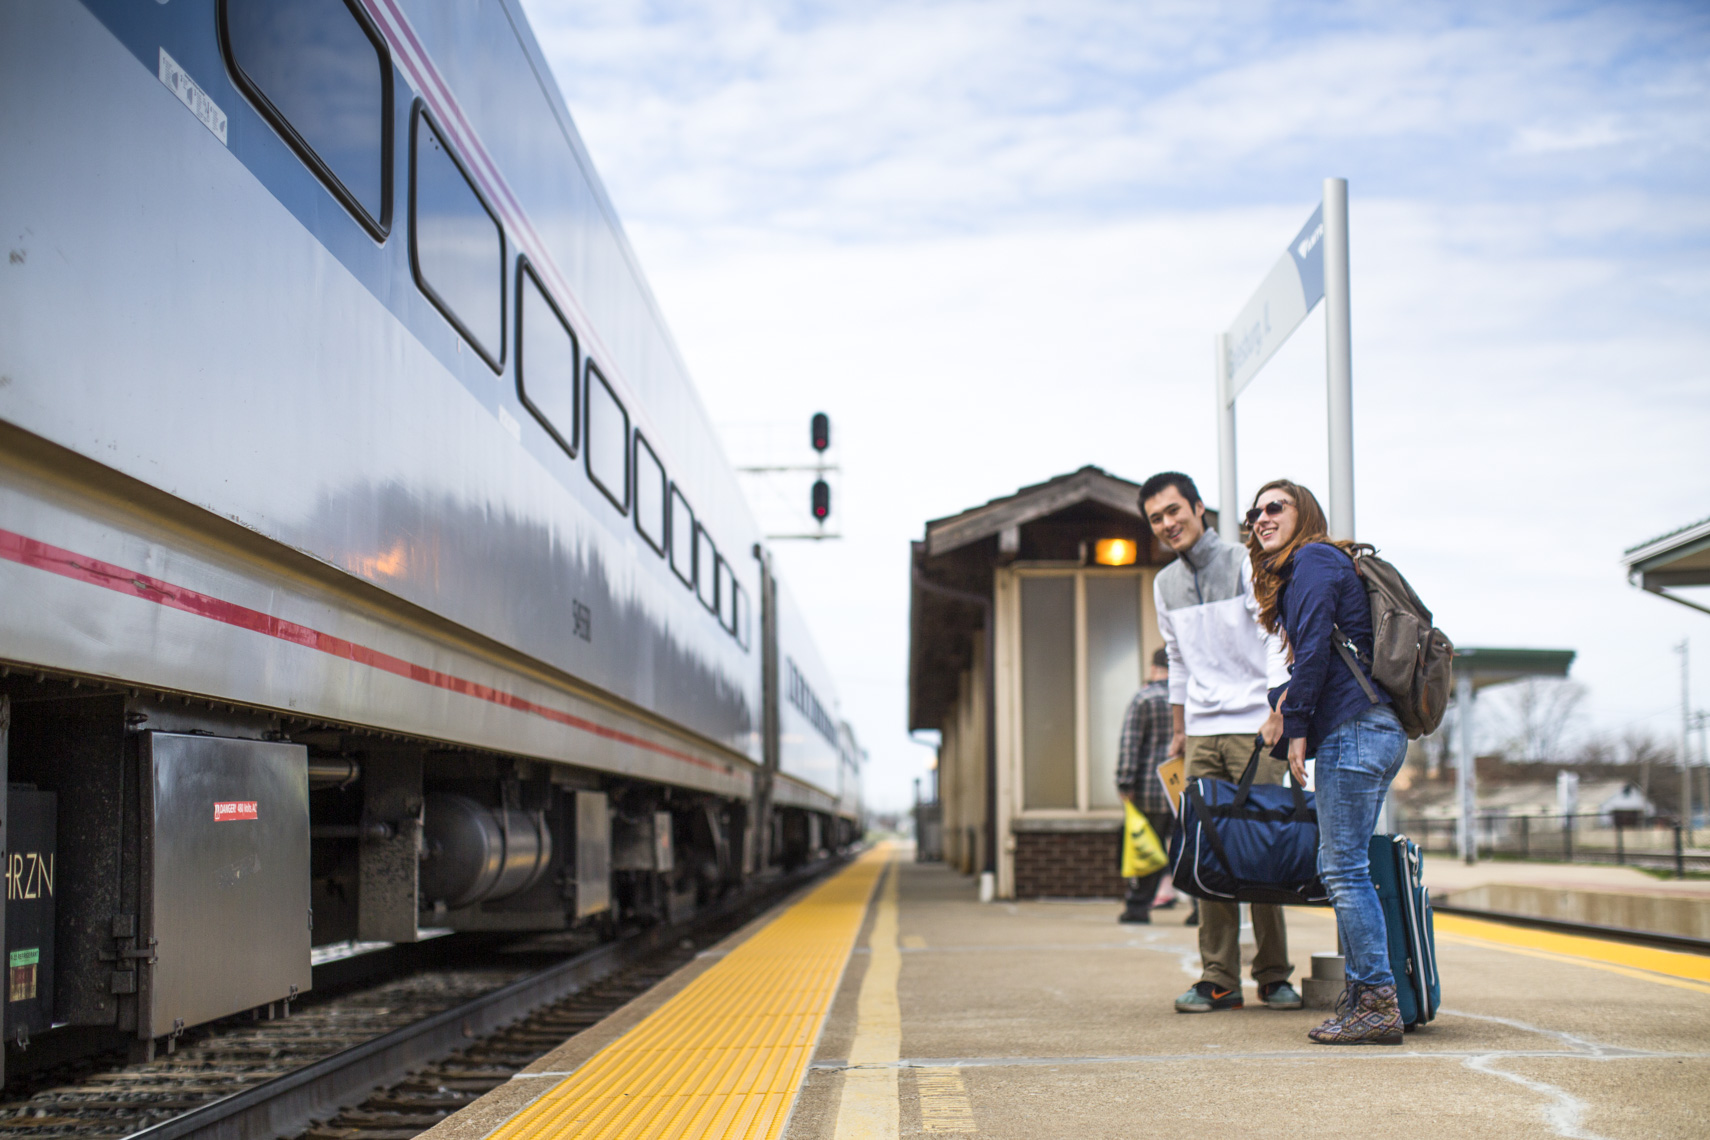 Two students wait to board a train to head home during a spring break in a photo by Ryan Donnell